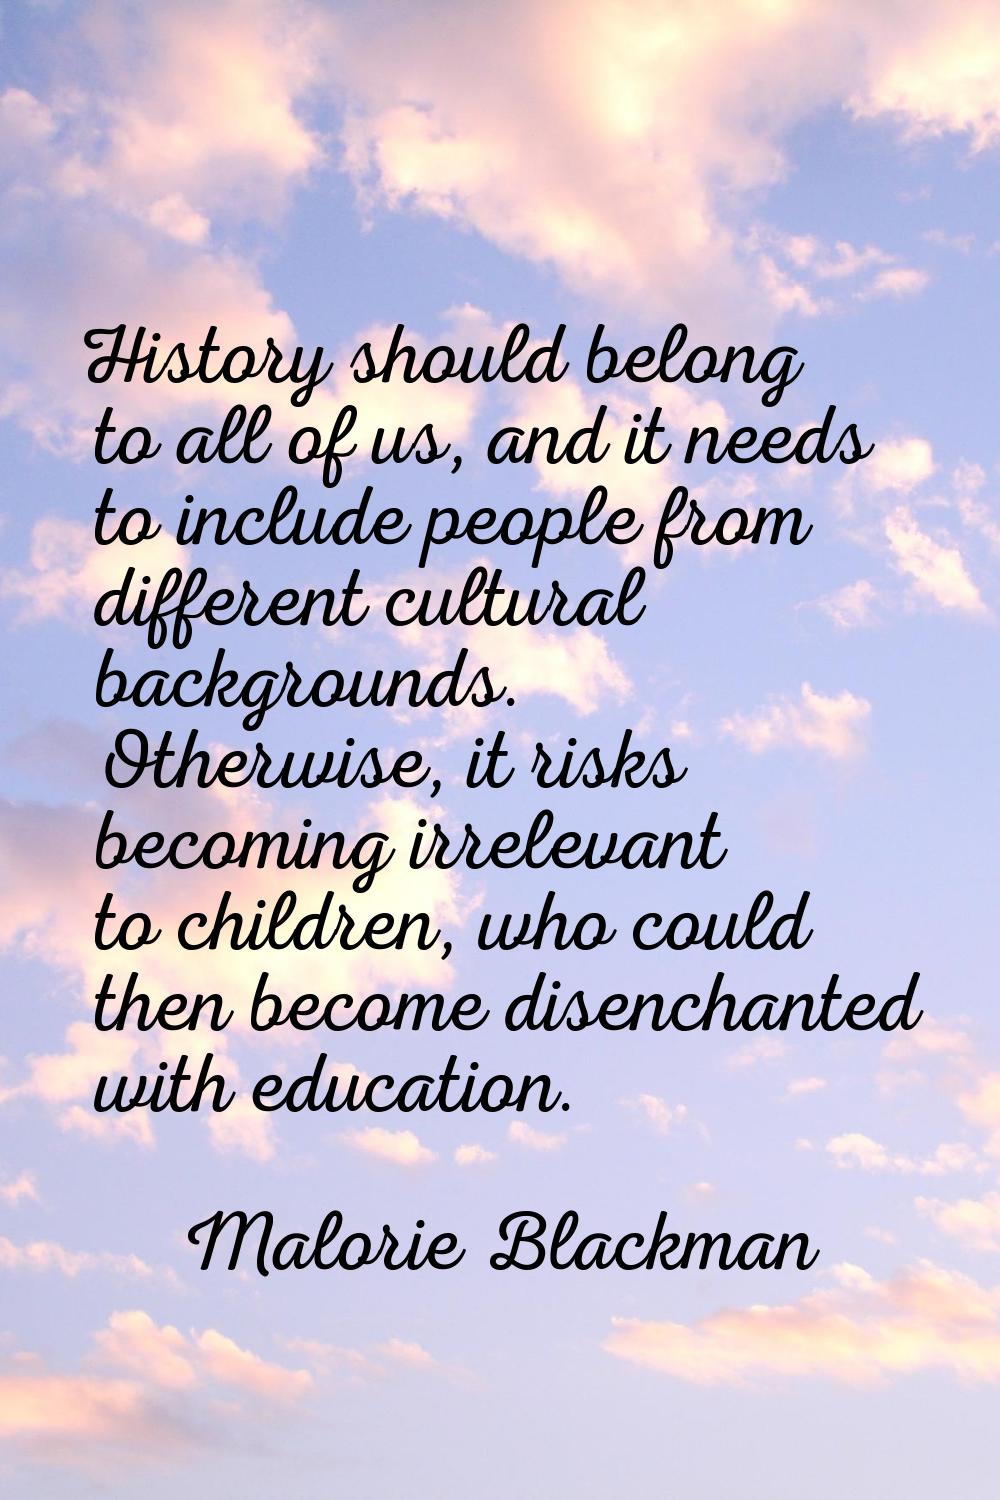 History should belong to all of us, and it needs to include people from different cultural backgrou